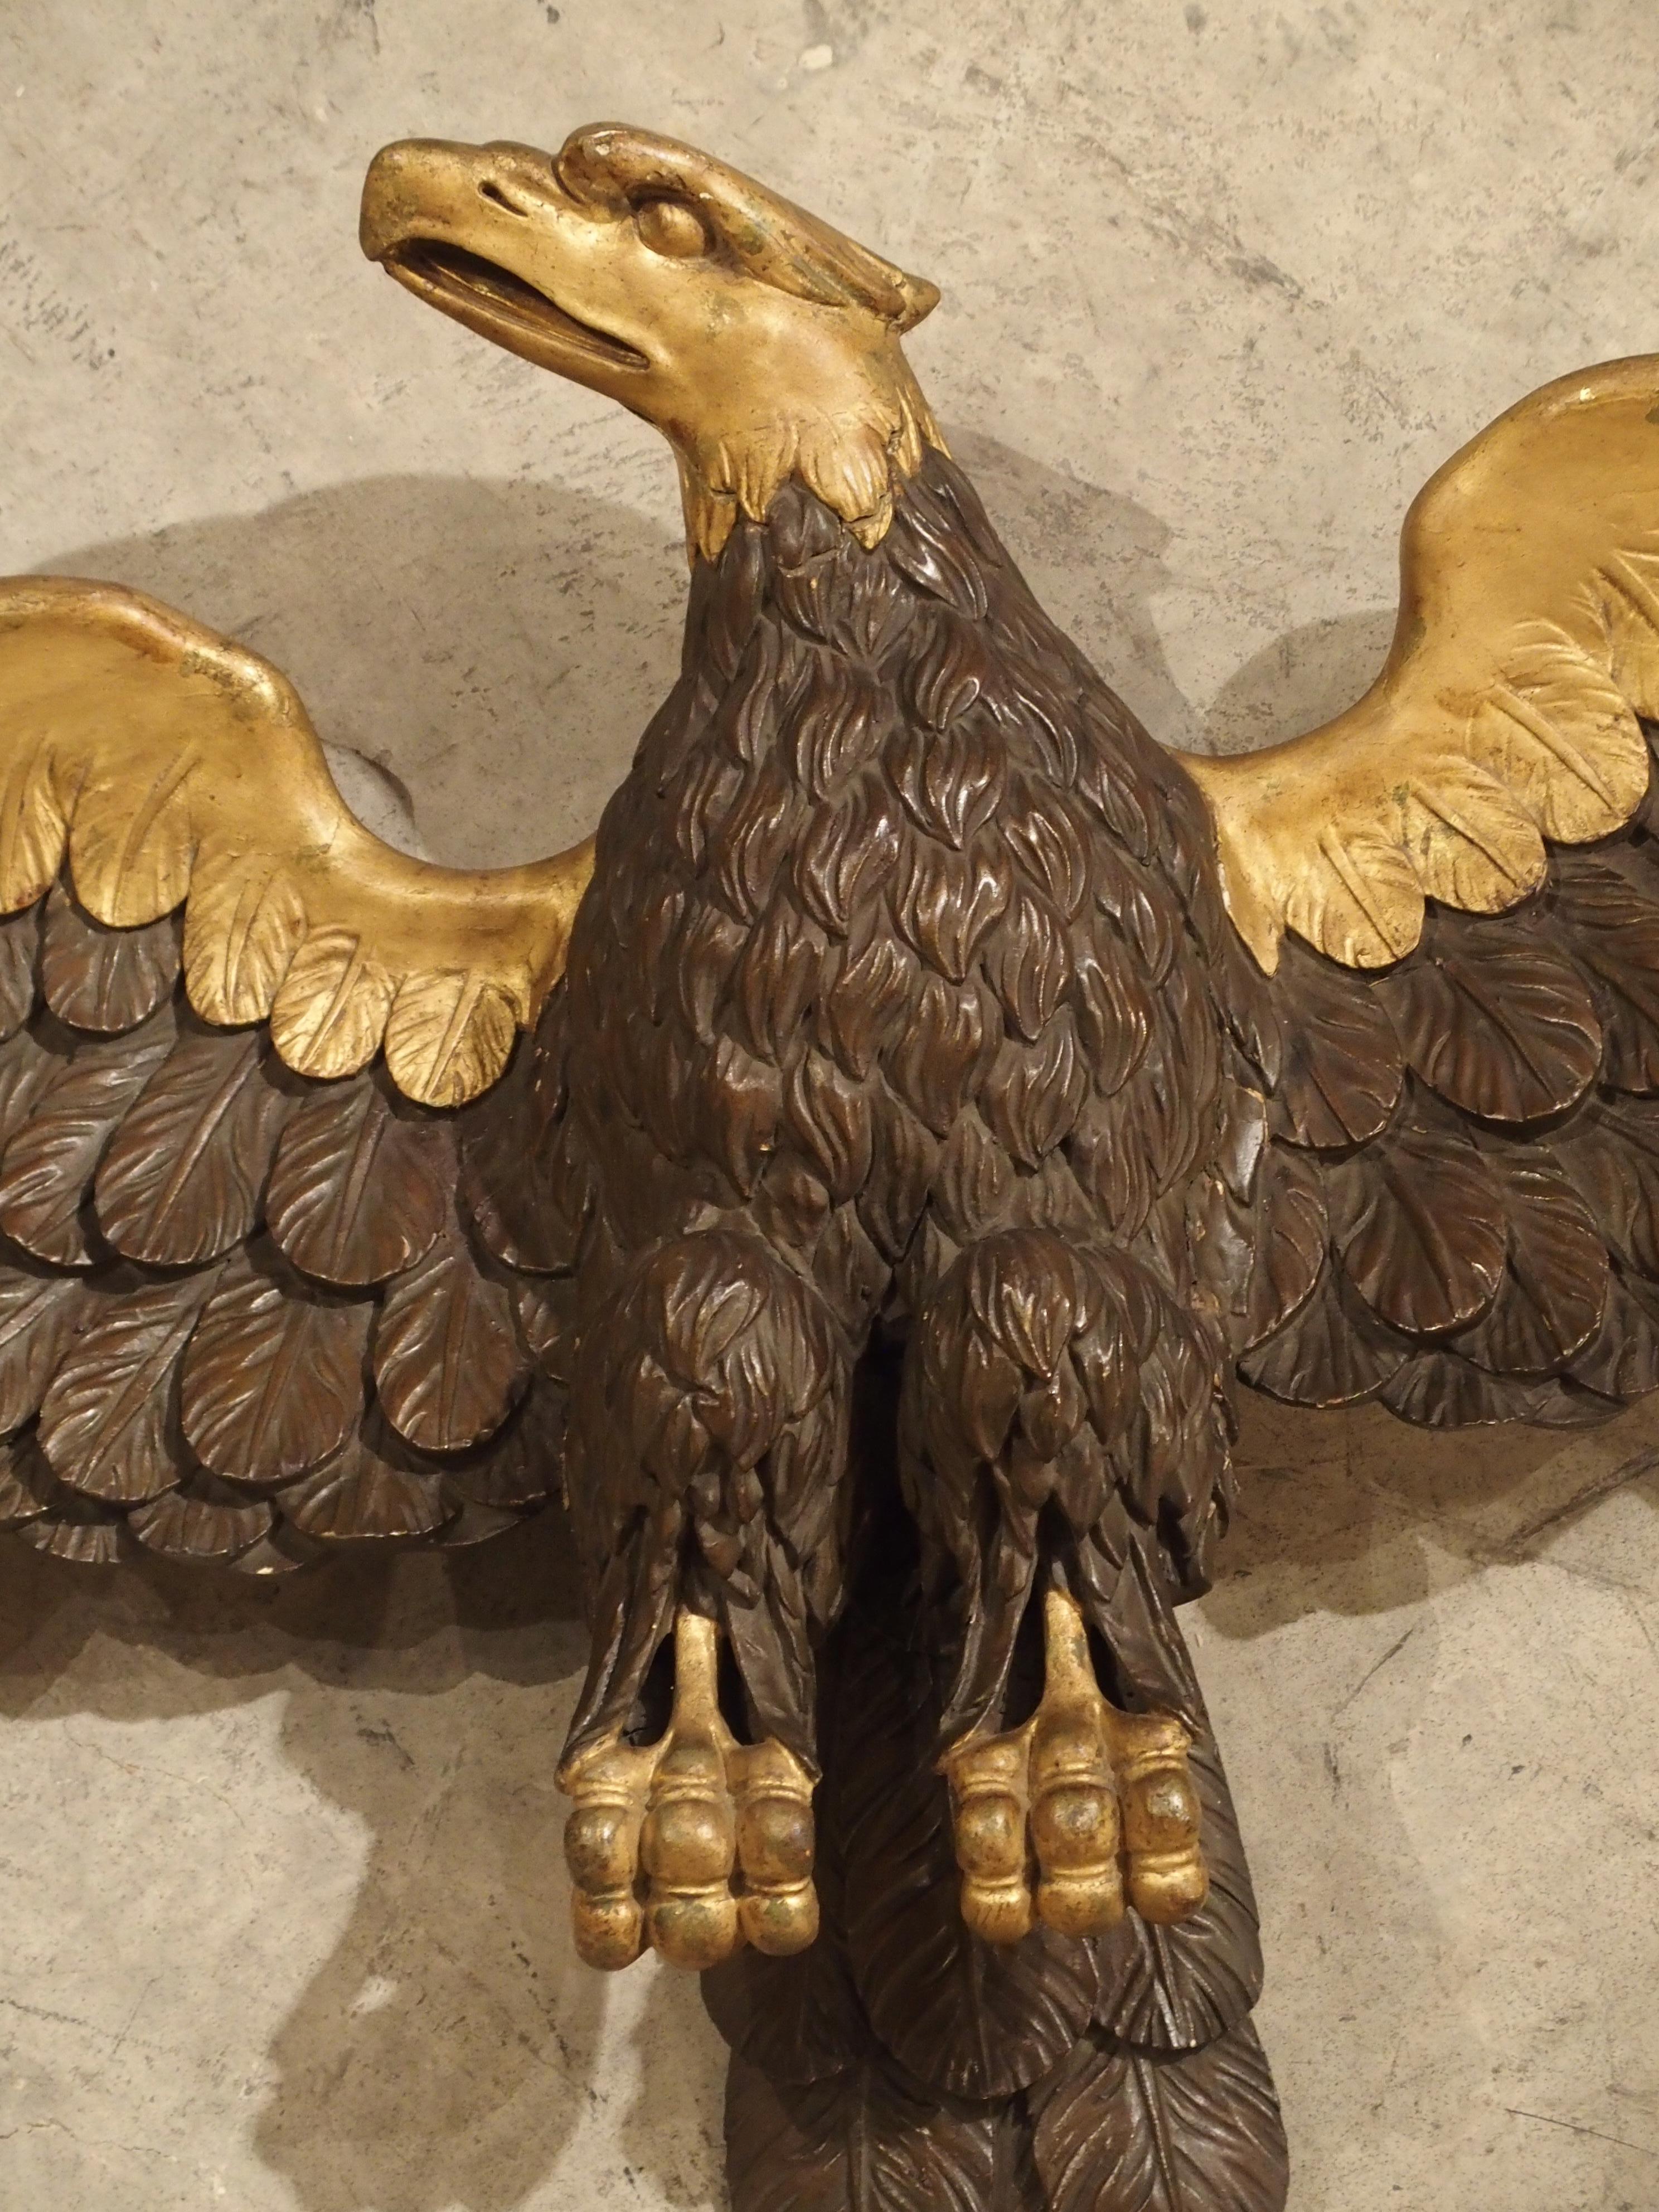 Hand-Carved Large Antique Carved Wooden Eagle Sculpture, Late 18th Century